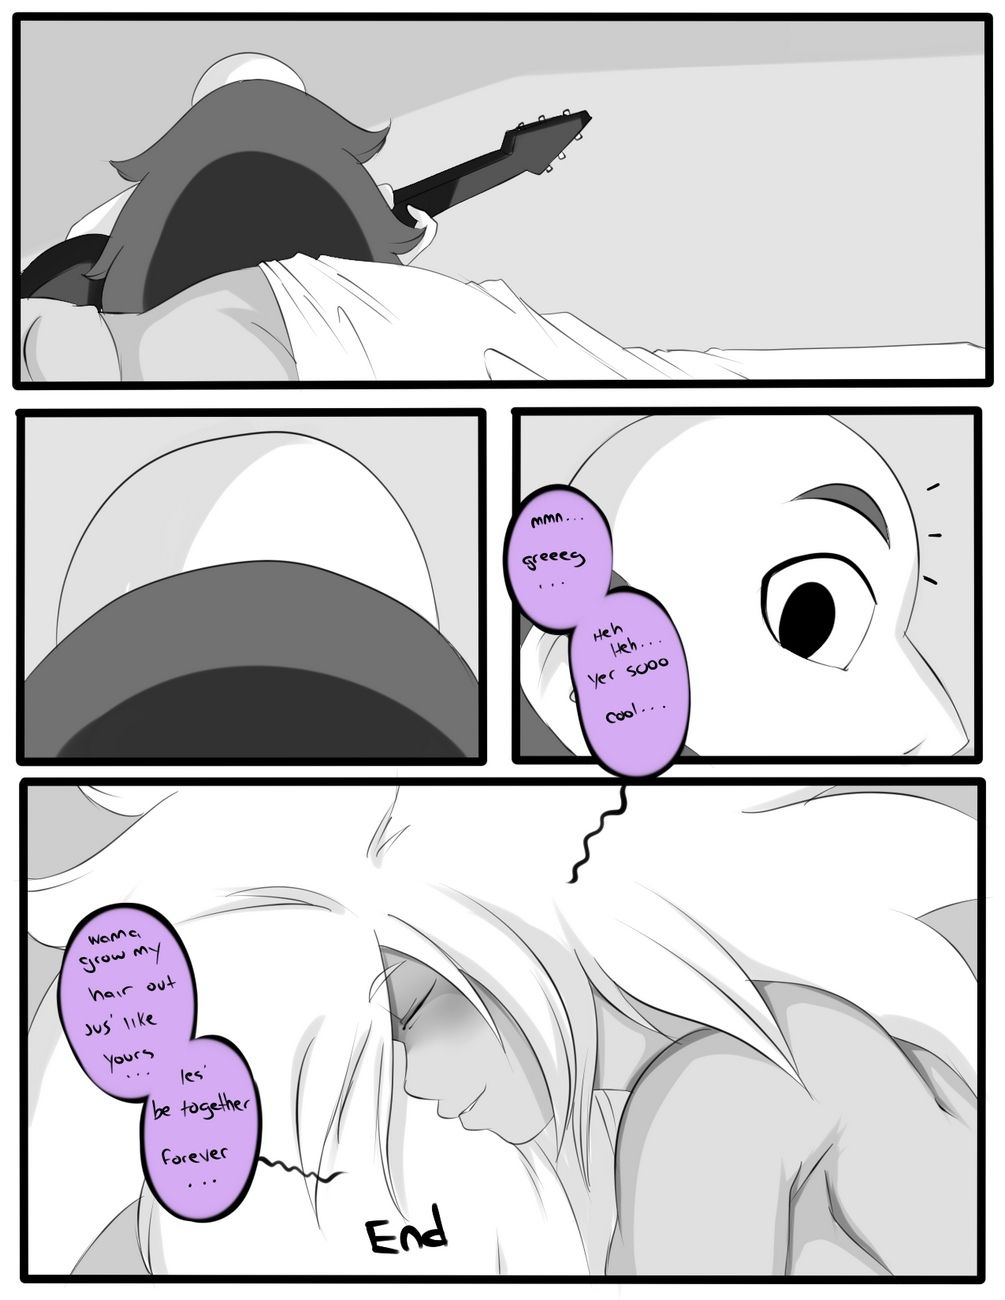 Amethysts Drinking Problem page 1